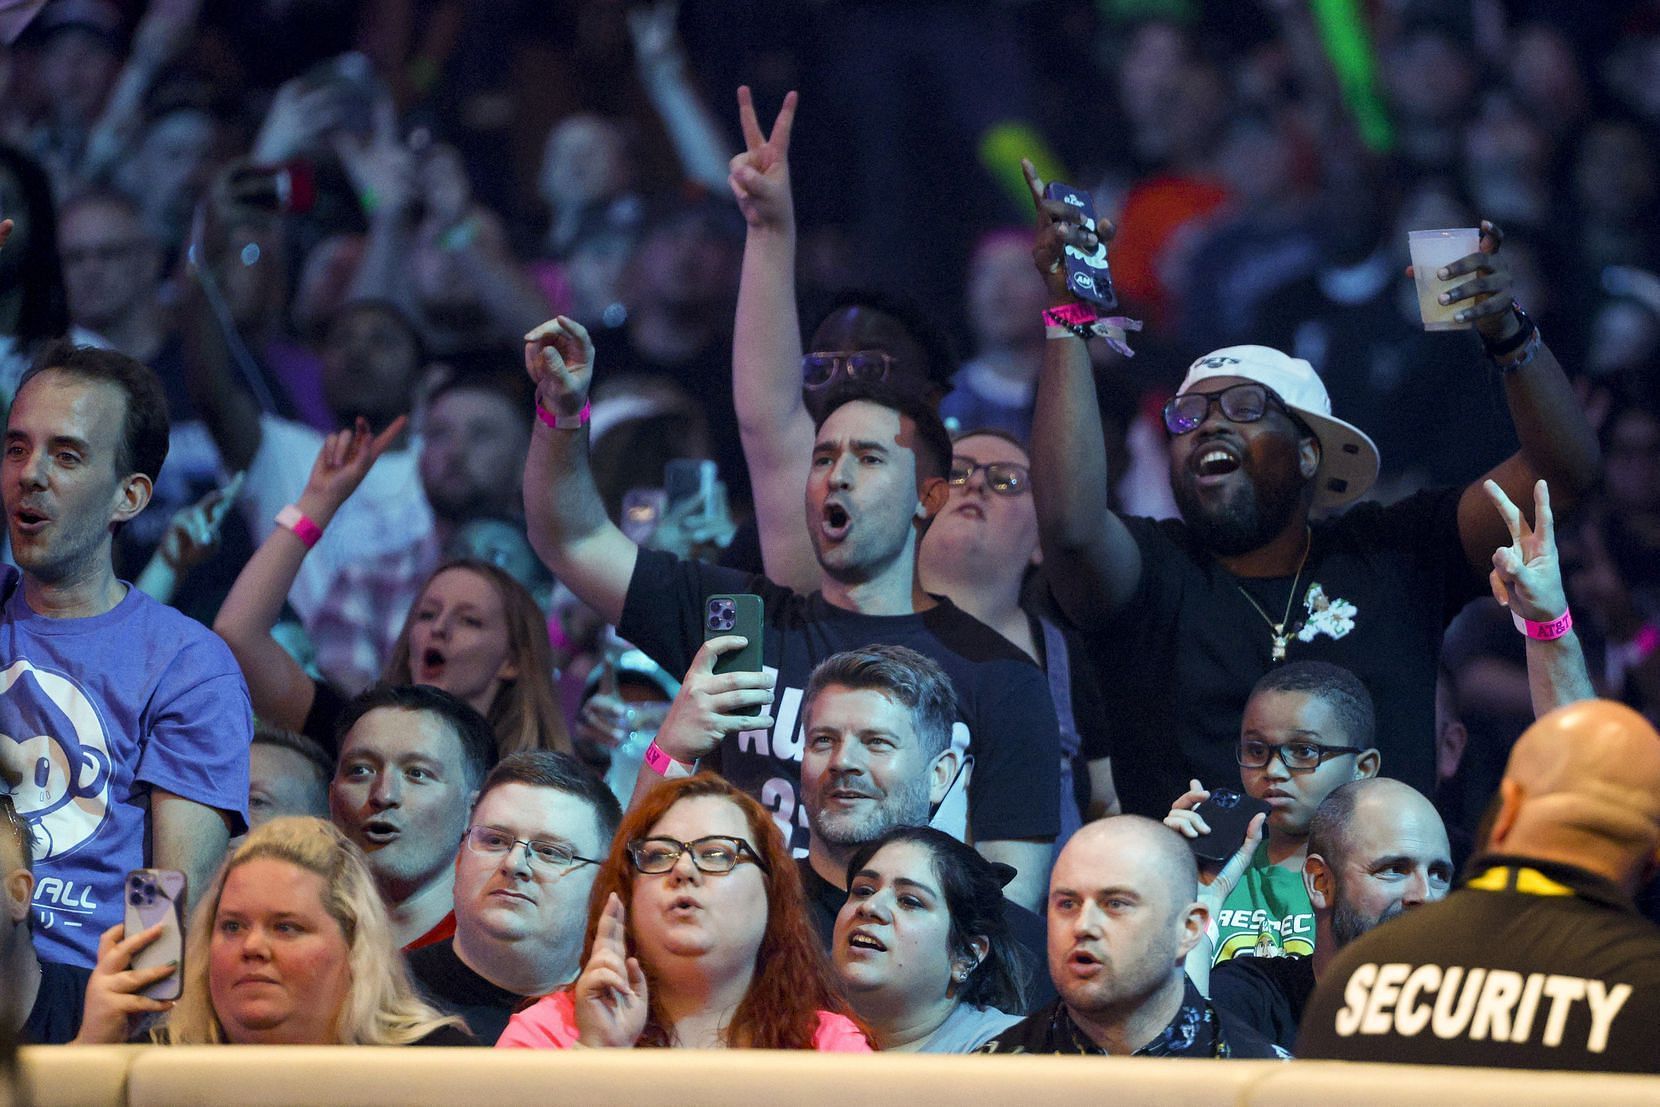 WWE fans were treated to something incredible by the superstars.